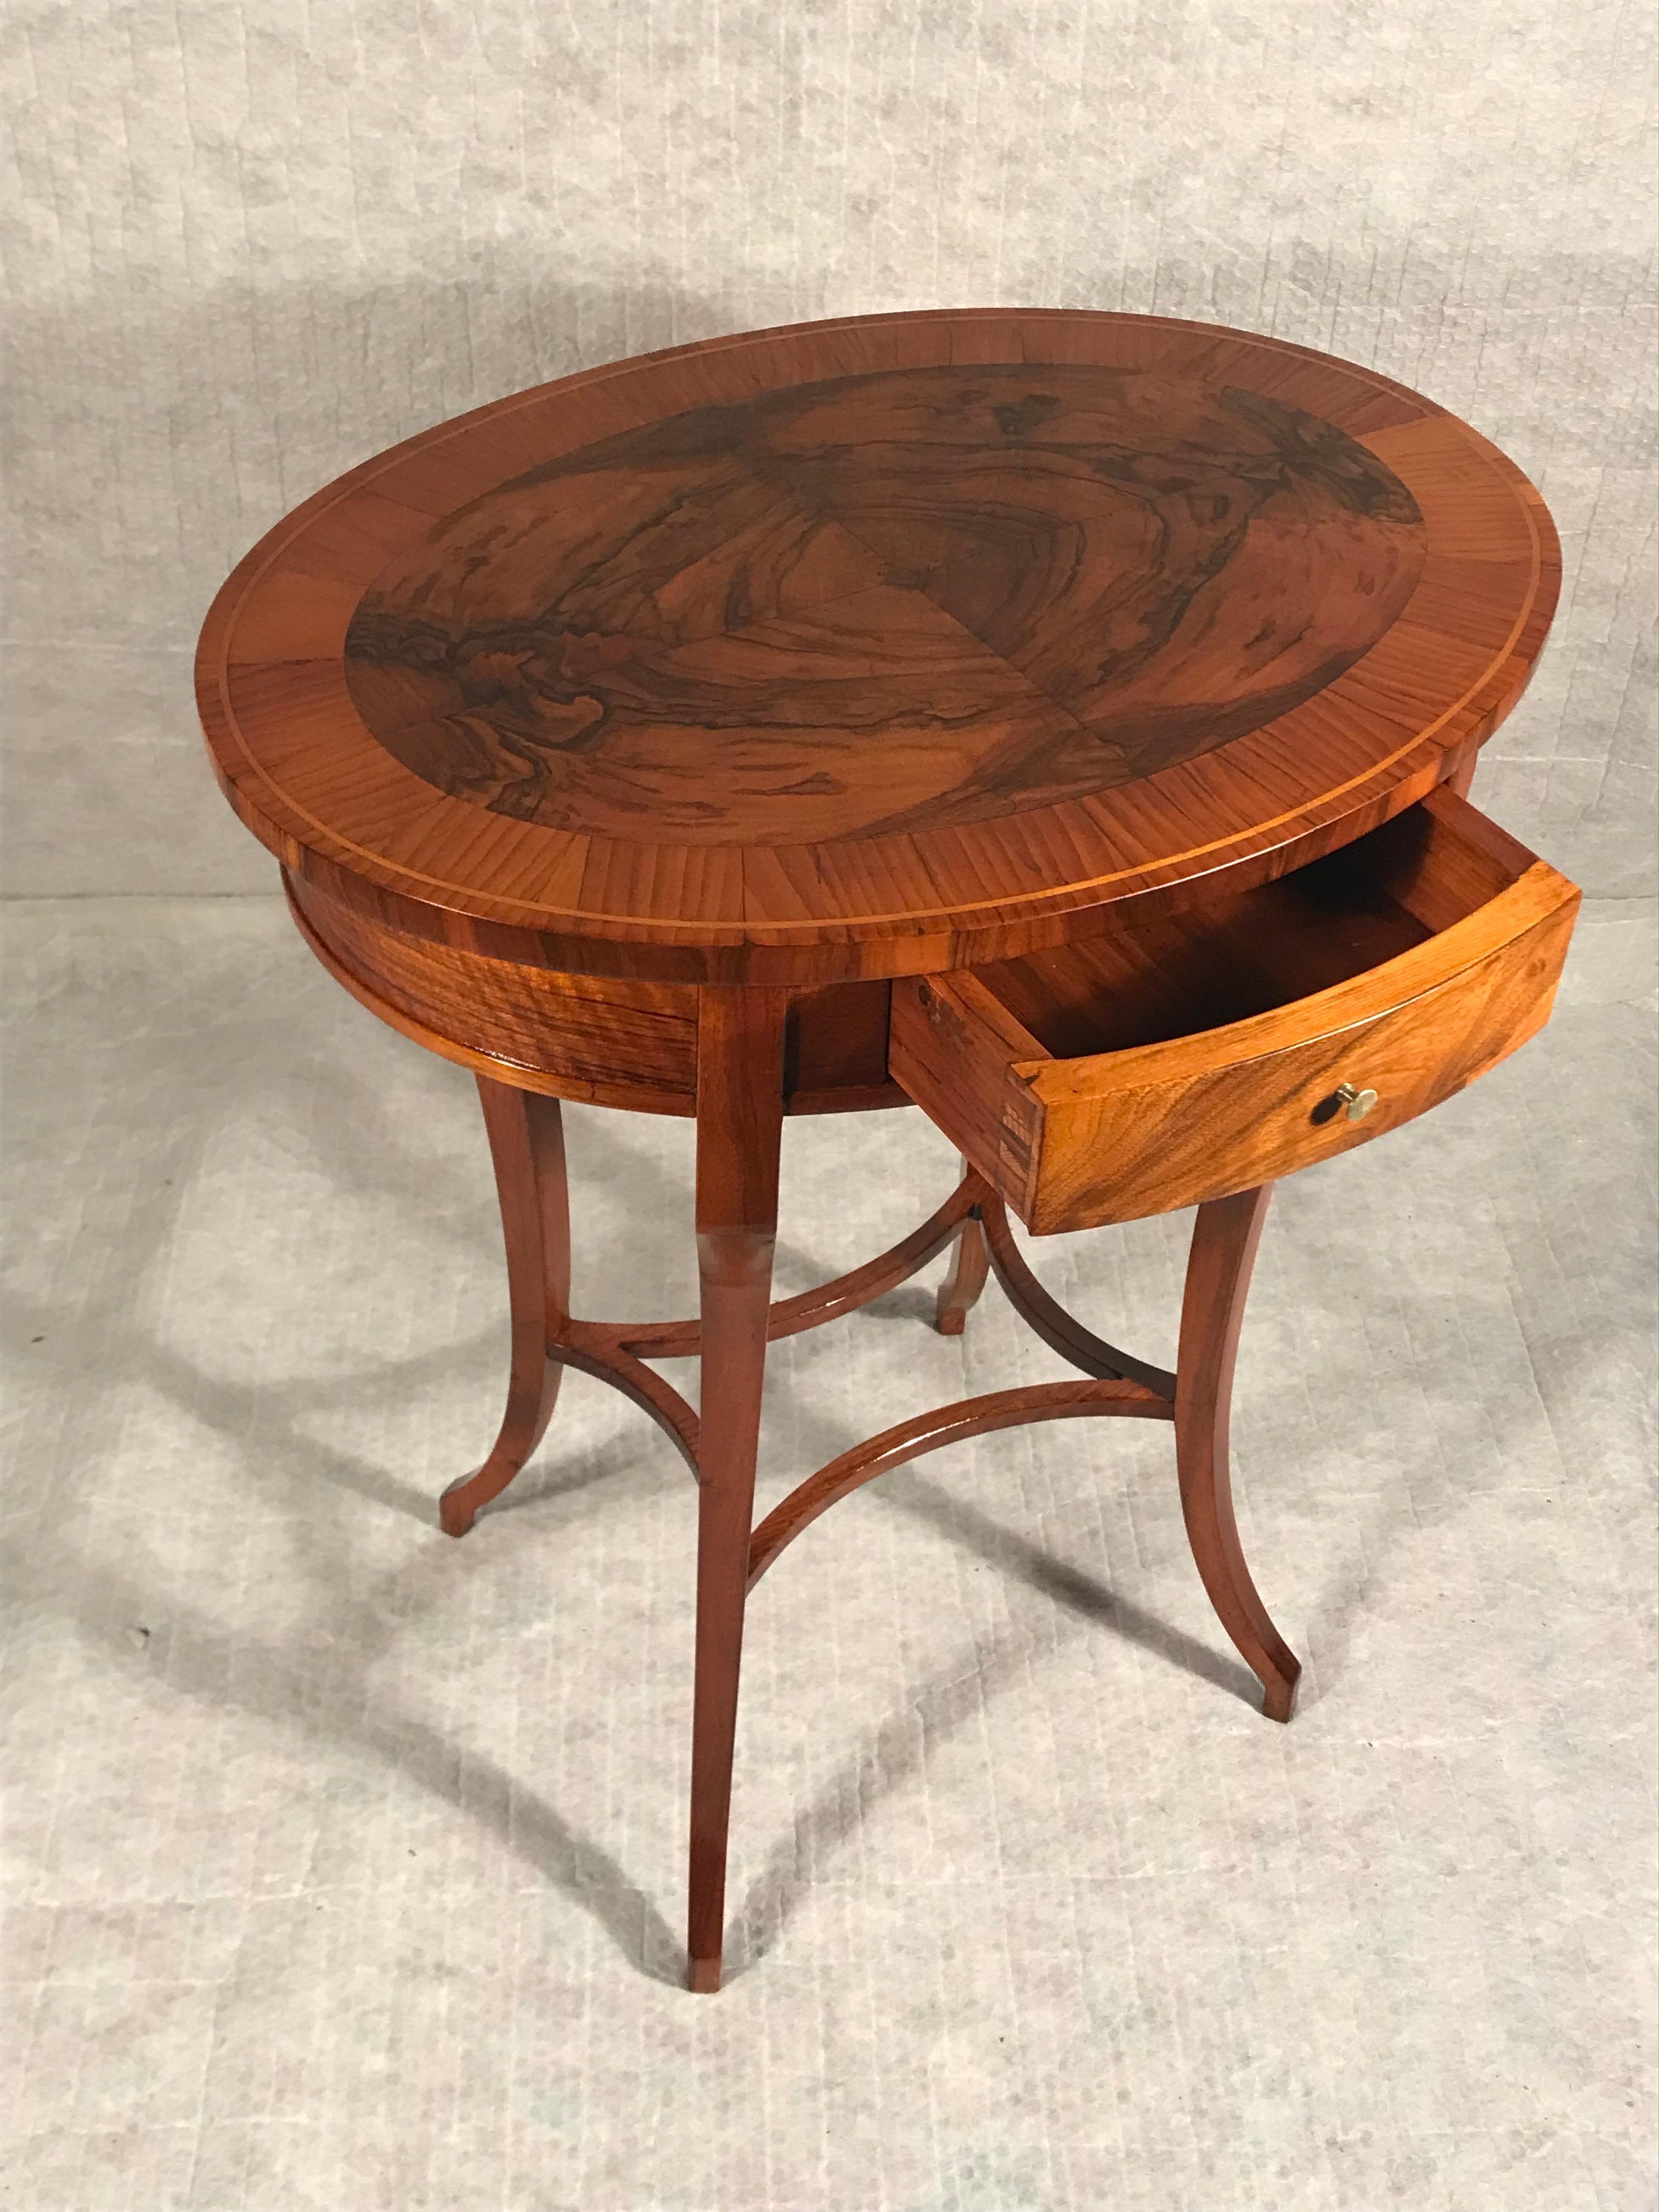 Discover the charm of our vintage Biedermeier Side Table featuring a stunning walnut veneer. Originating from Southern Germany and crafted in 1820, this elegant oval-shaped table with a central drawer is a timeless piece of history.

The table is